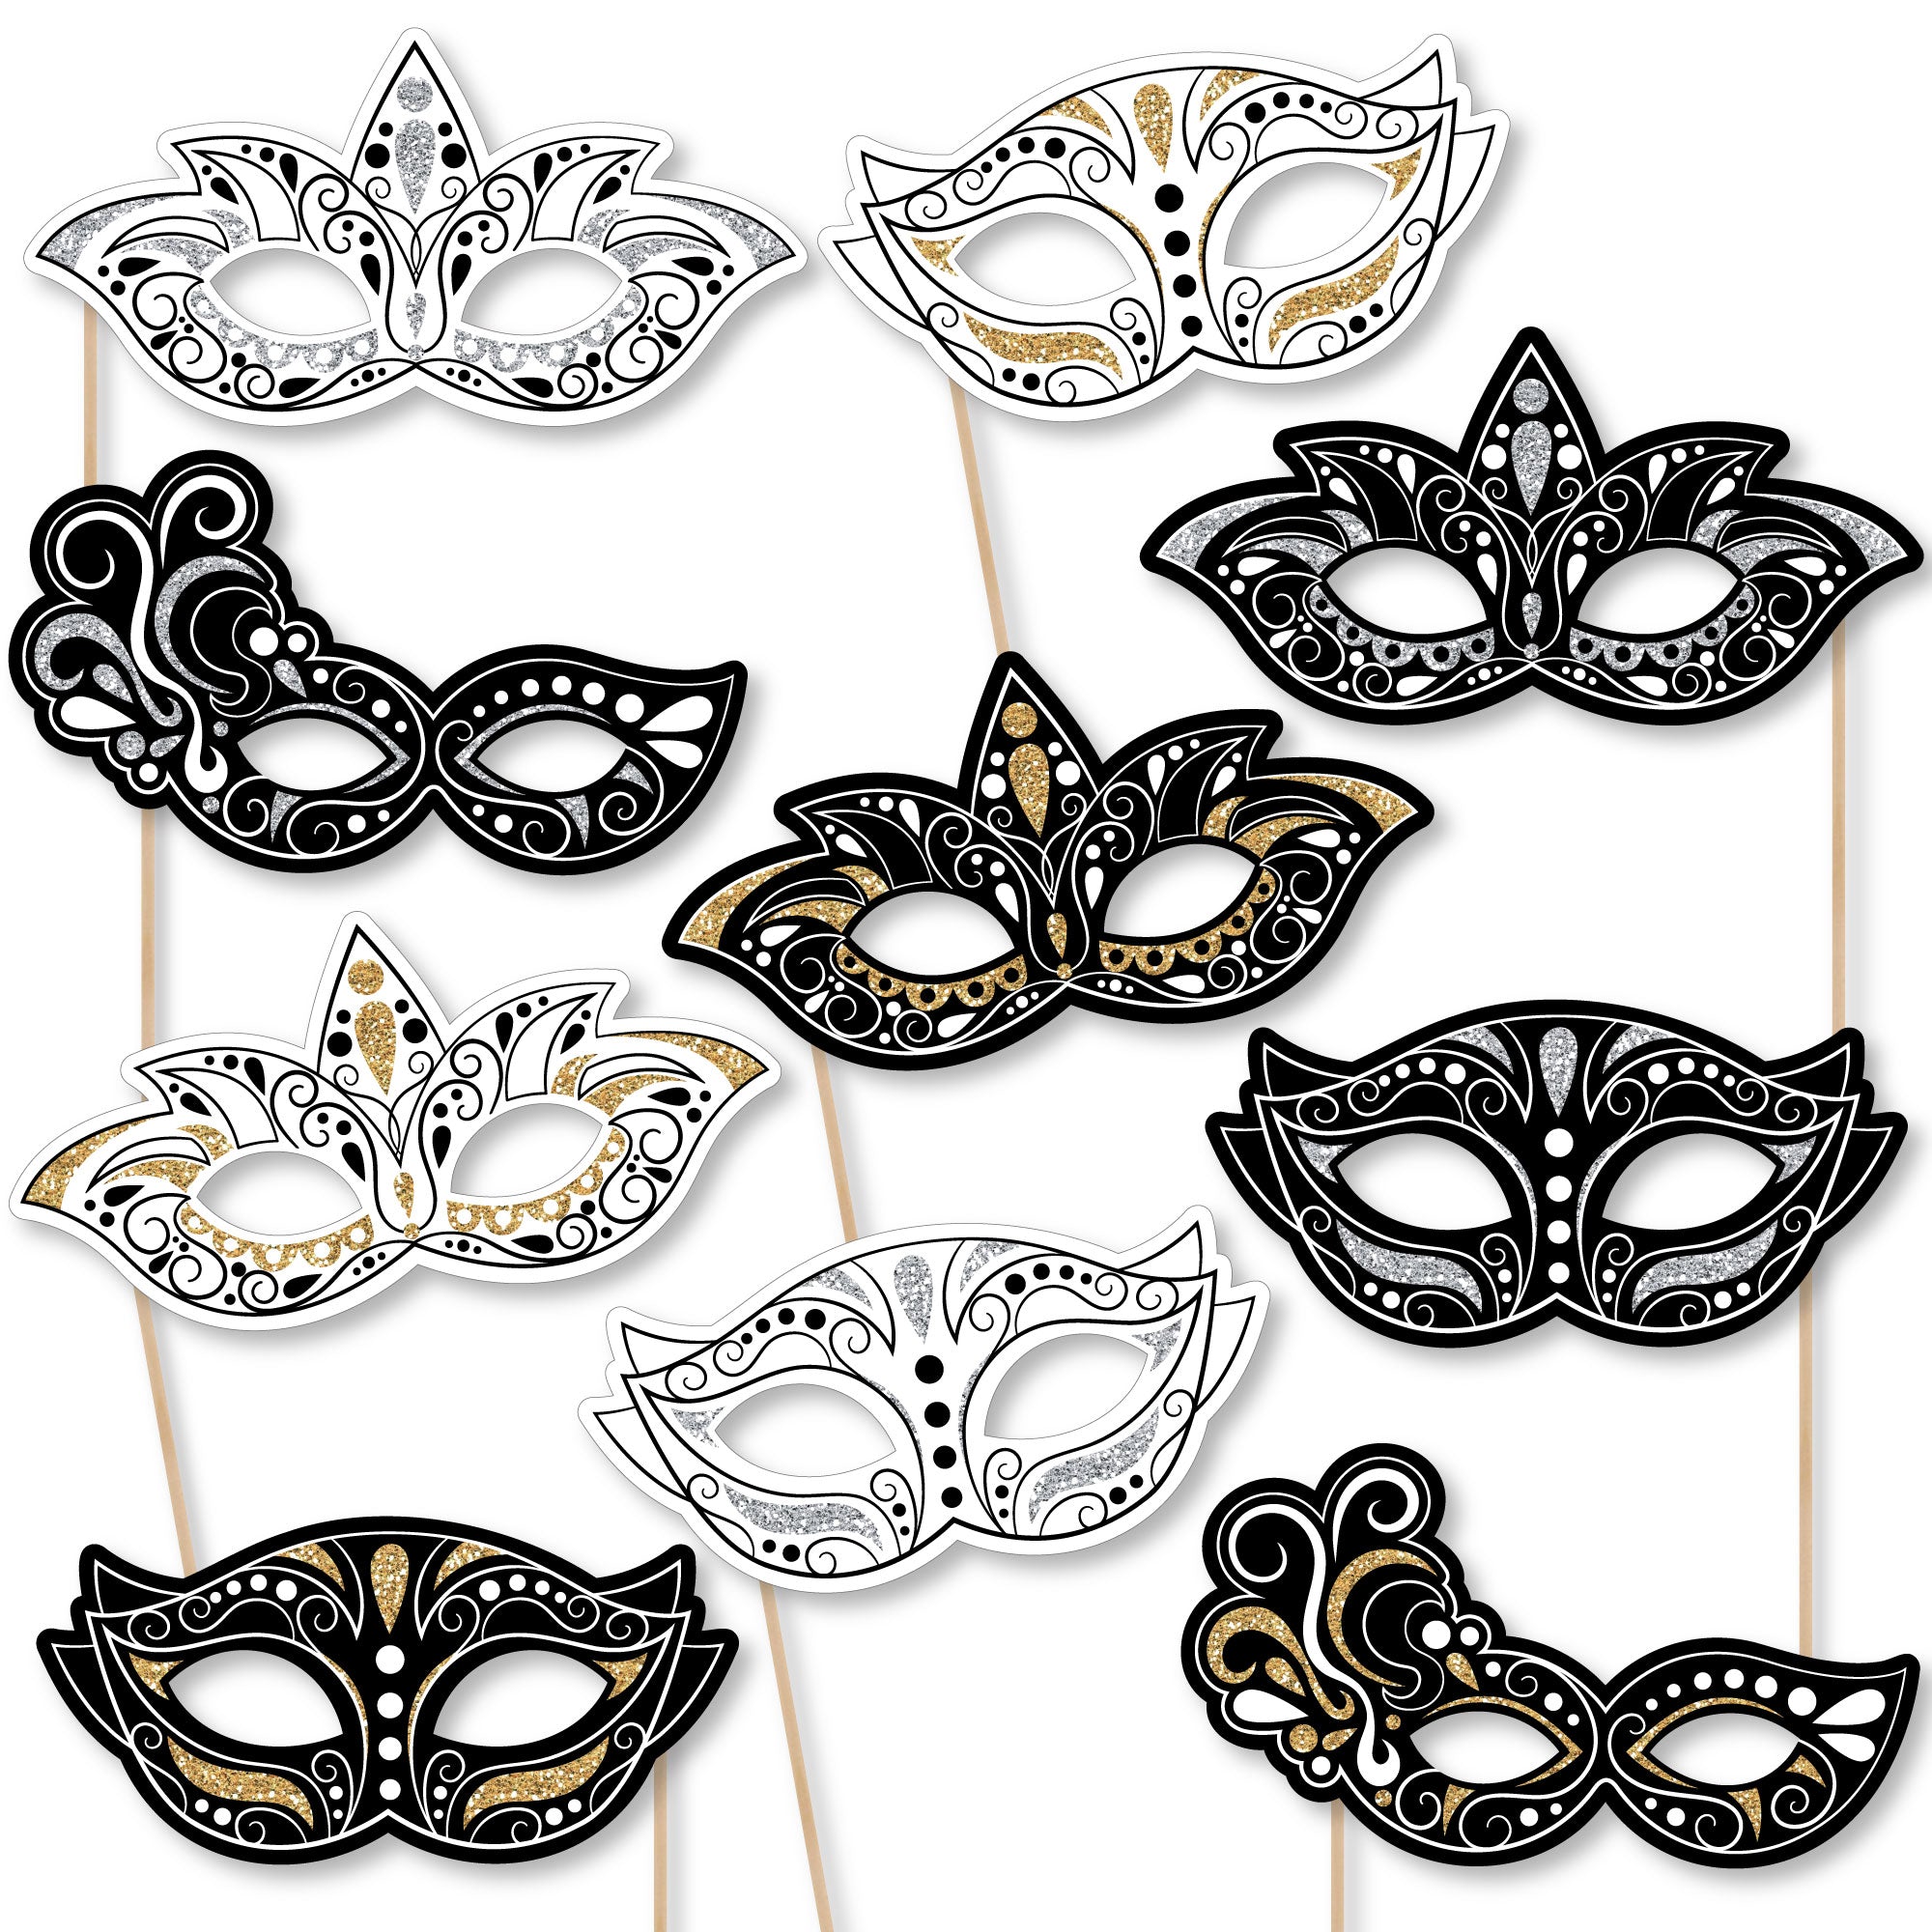 Masquerade Mask, New Years Eve Decorations, Mardi Gras Mask, 40th